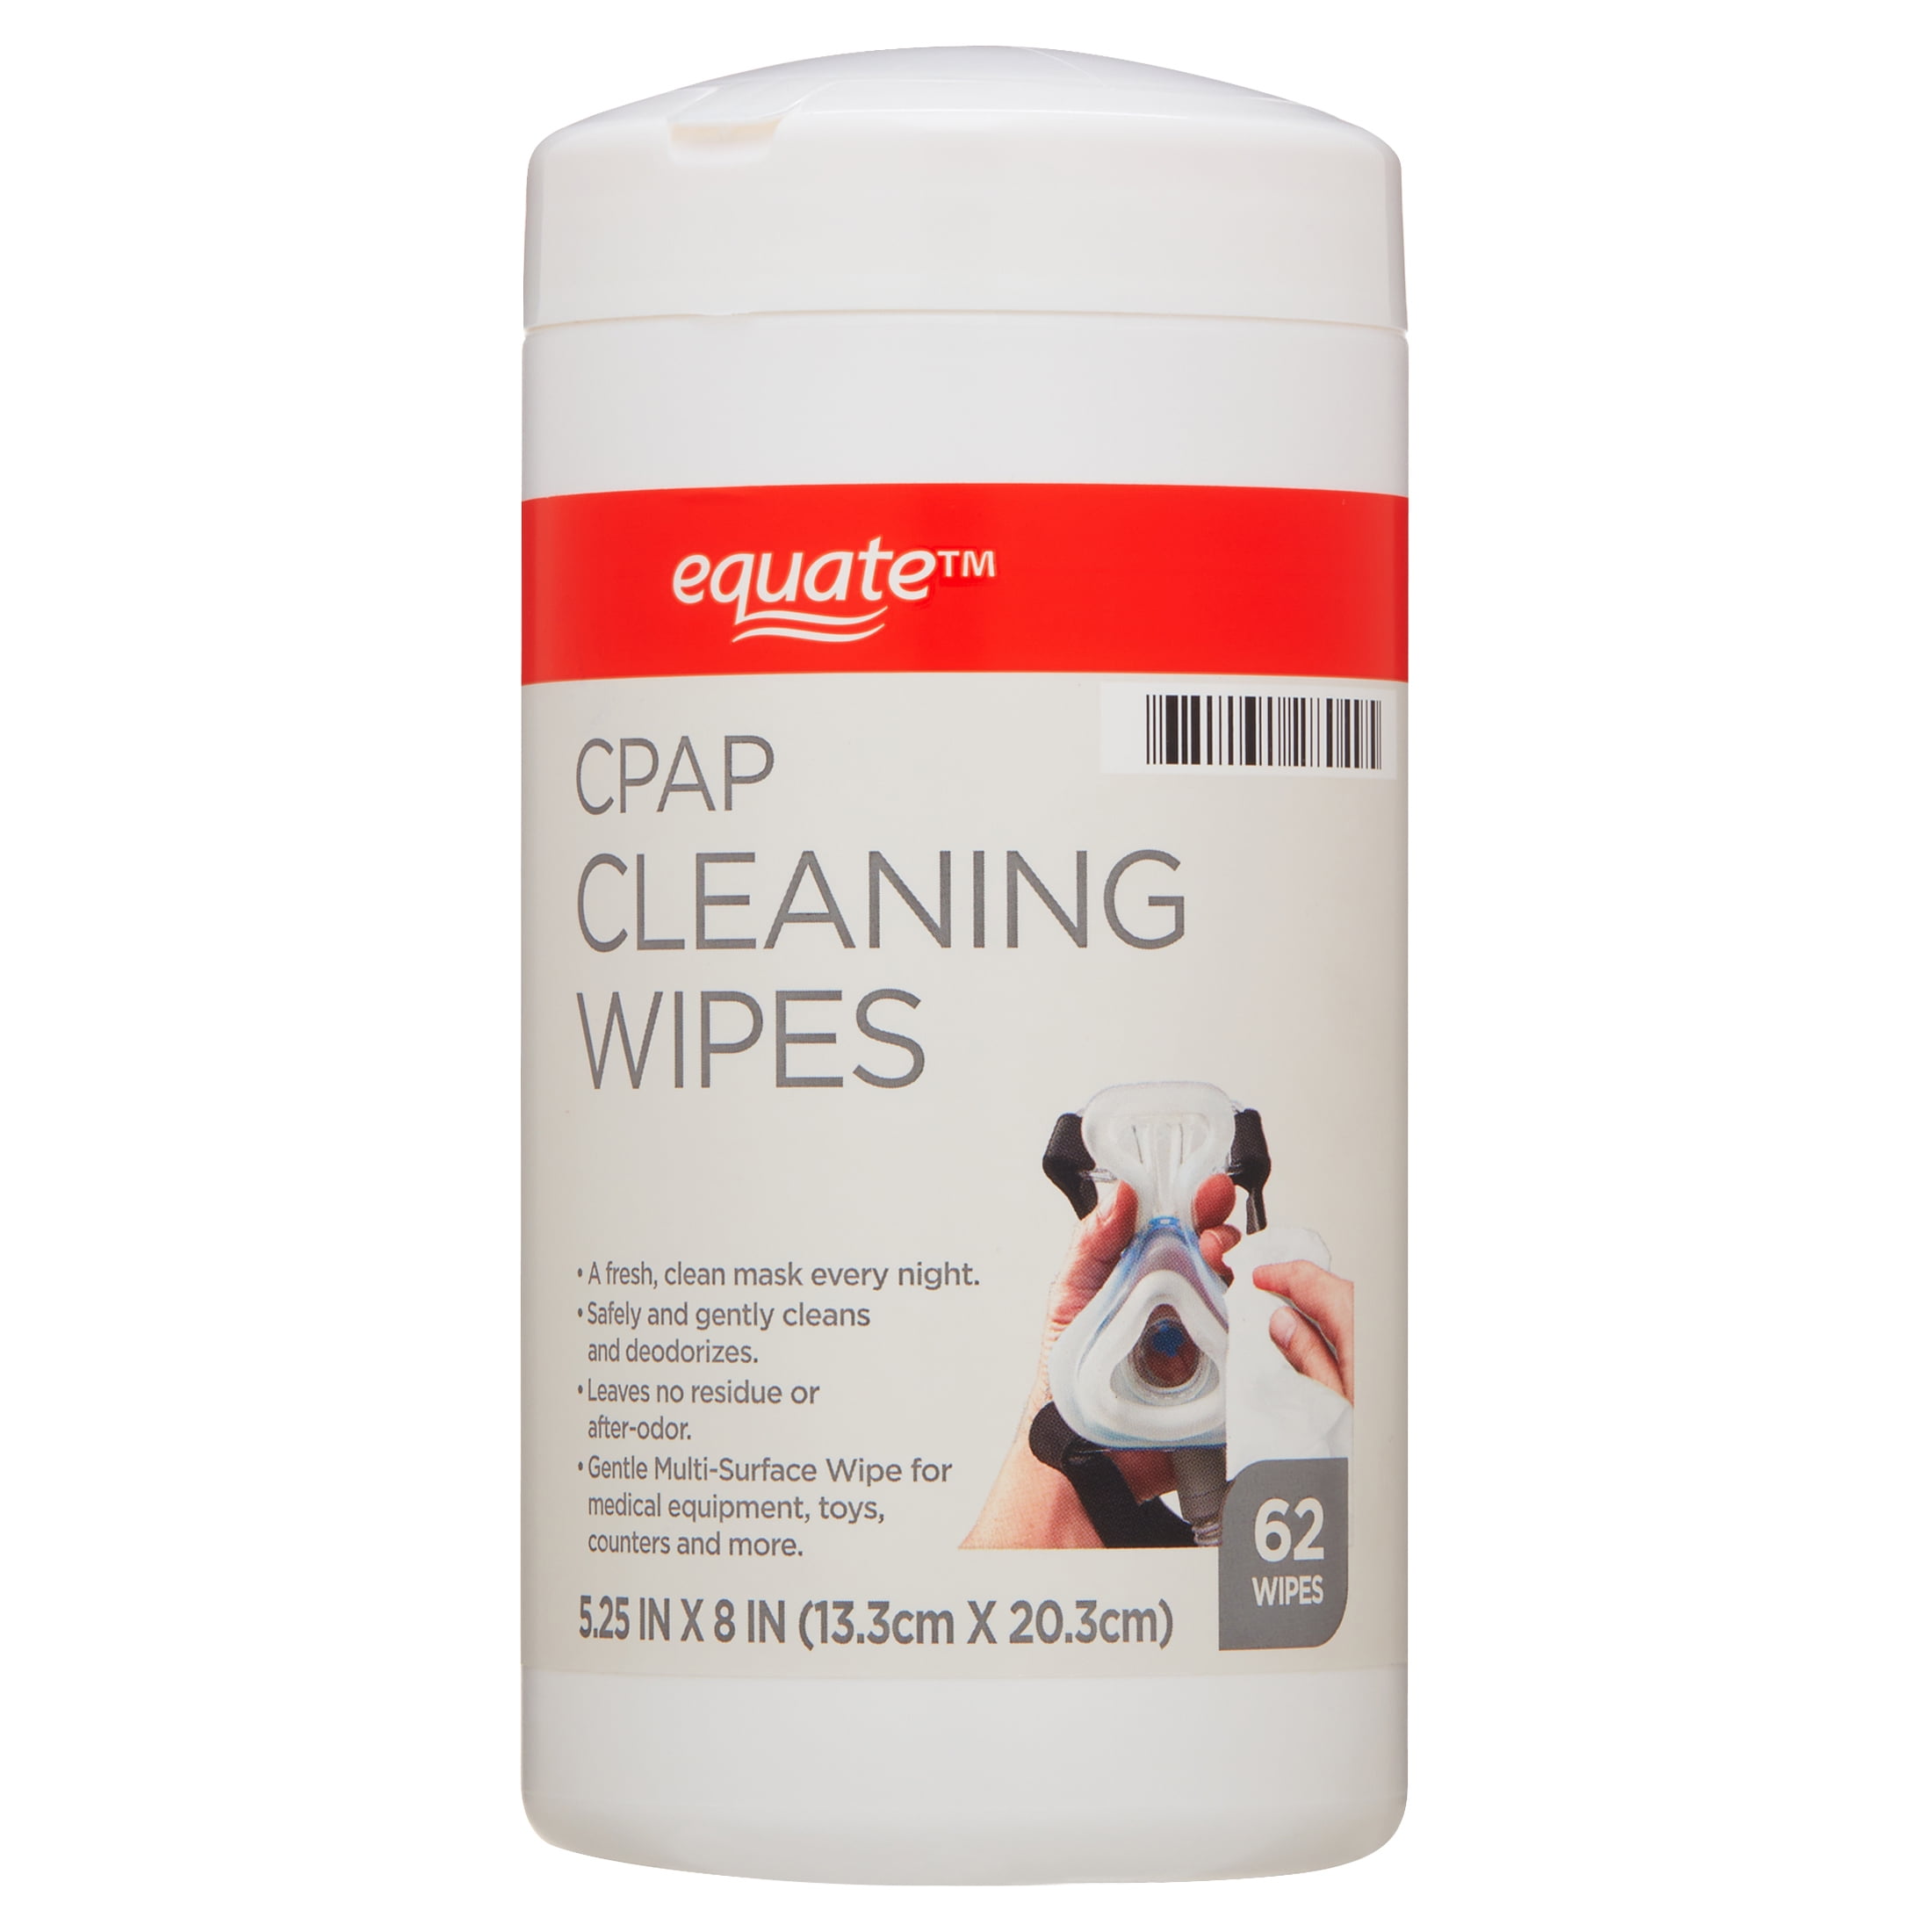 Equate CPAP Mask Cleaning Wipes, 62 Count